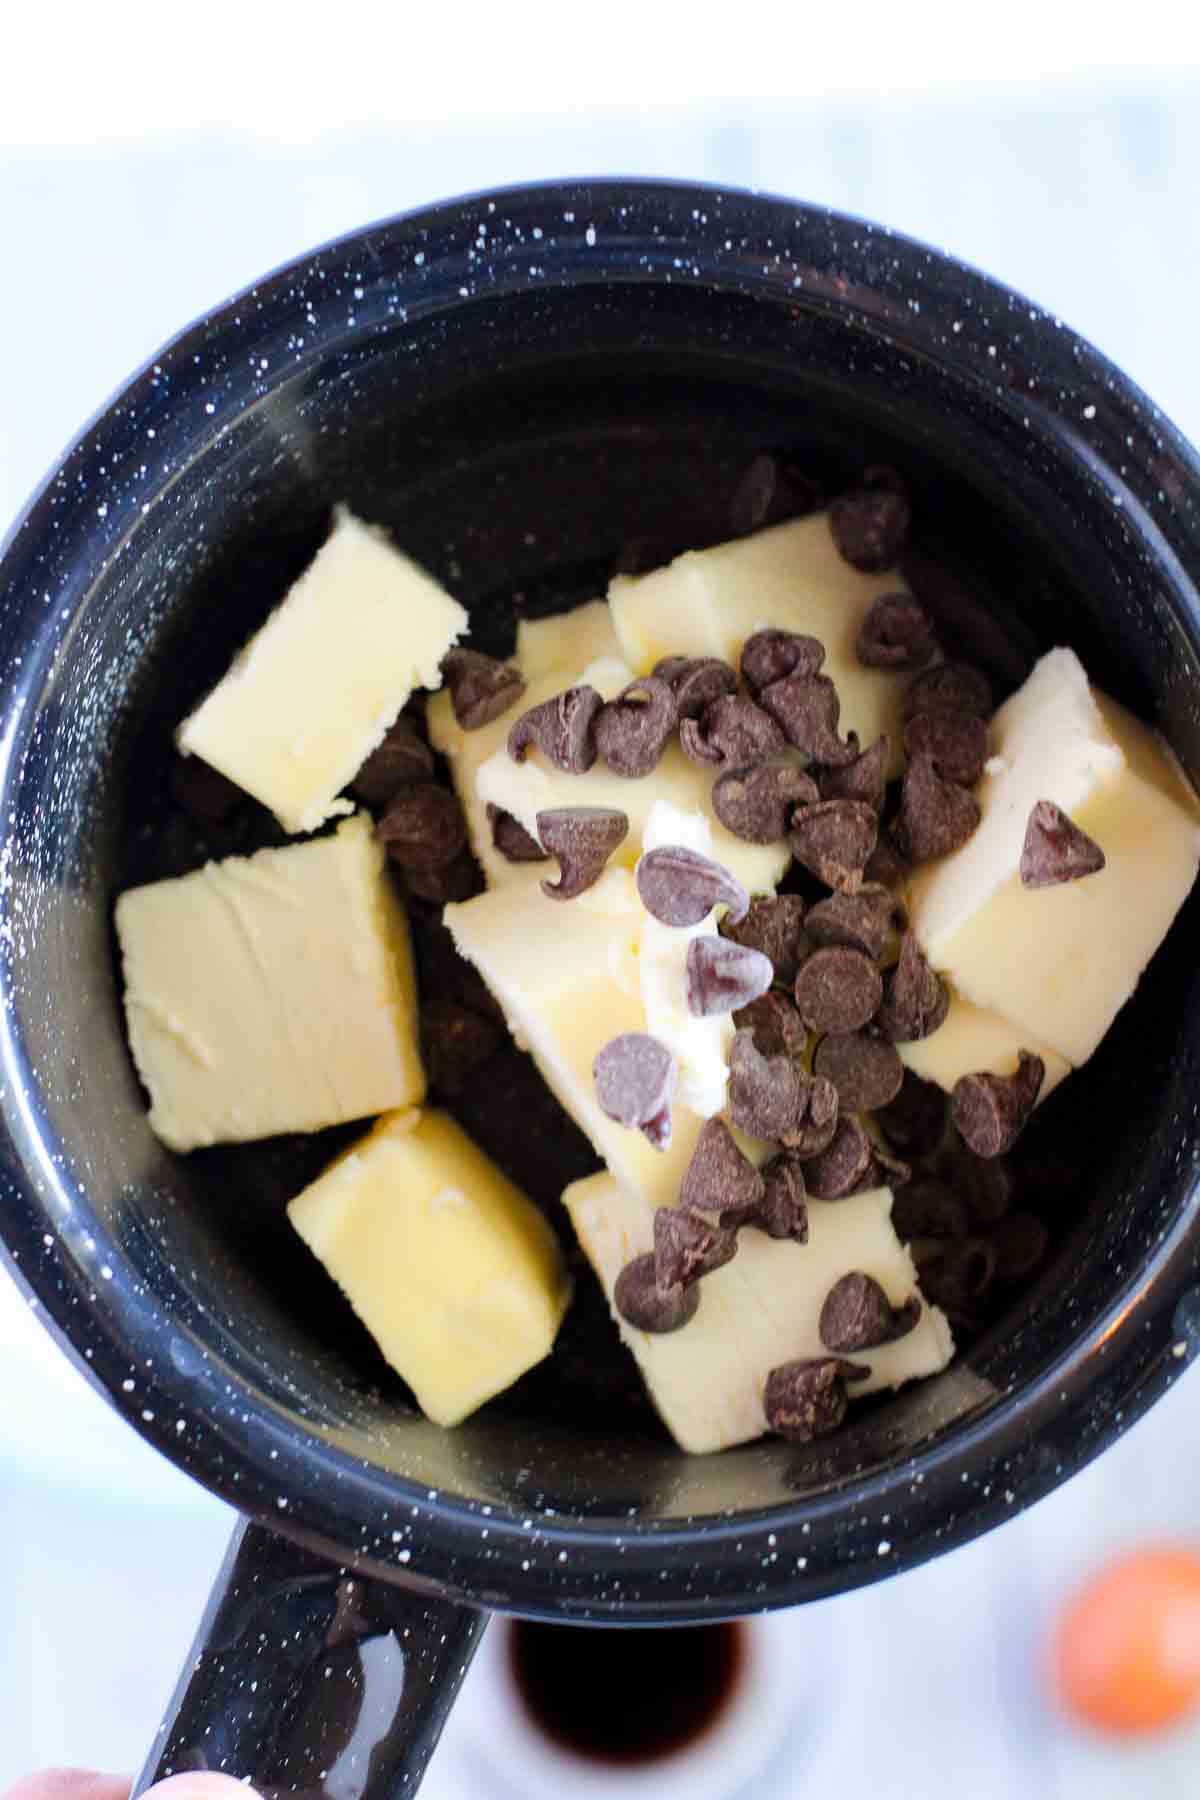 Cut up butter and chocolate chips in a dark enamelled pot.